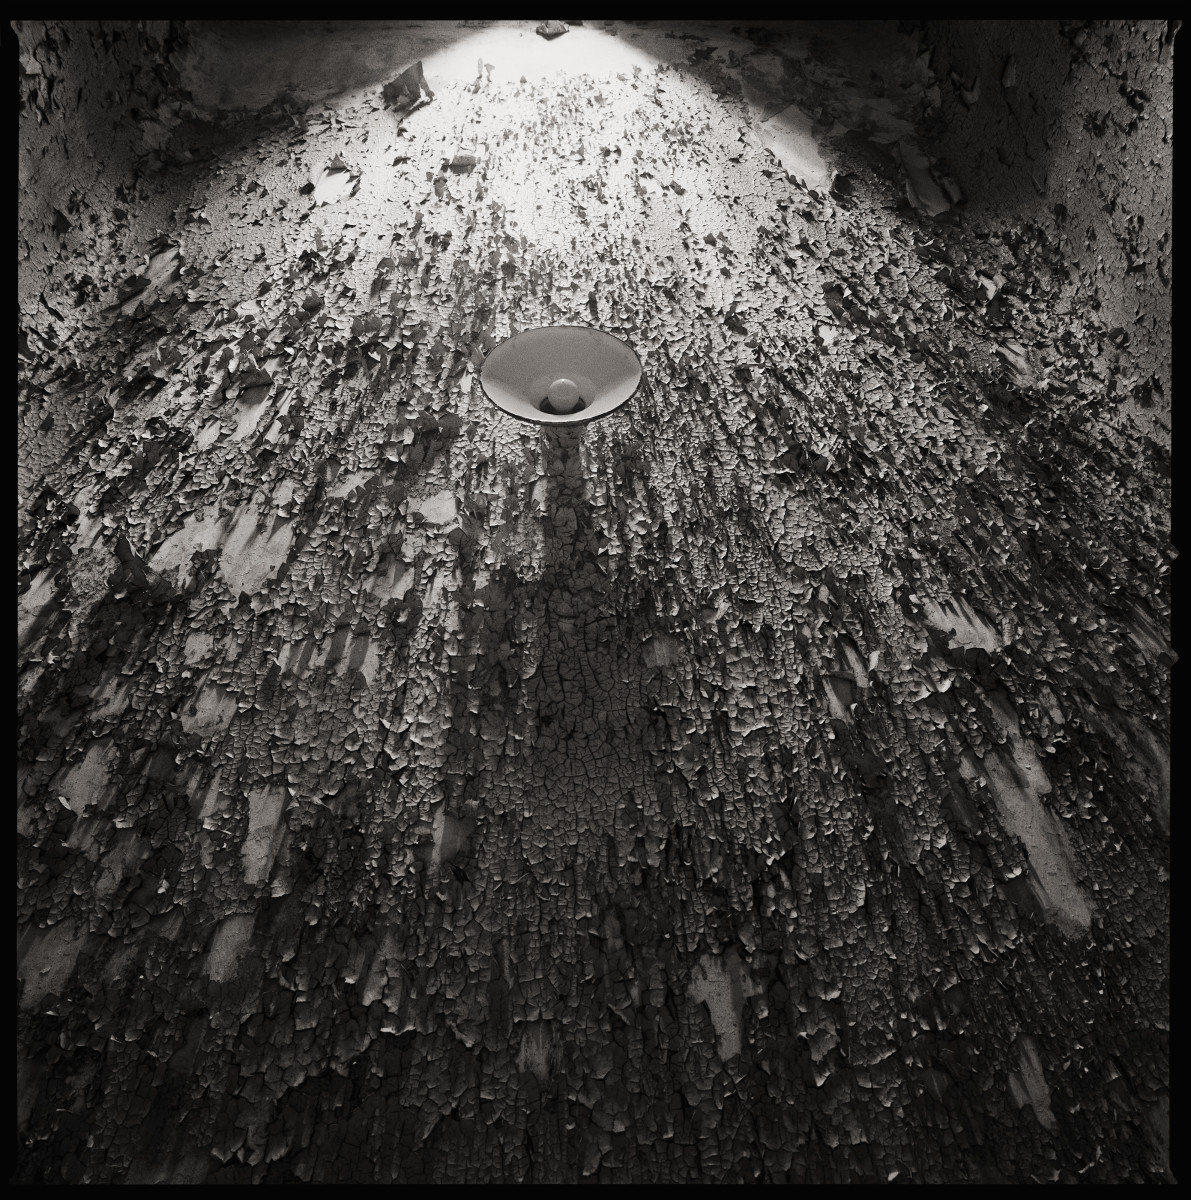 Untitled by Eric T. Kunsman  Image: ID: A black and white image shows the ceiling with its peeling paint and cracking cement.  There is a circular light fixture hanging from the ceiling.  There is light coming from the top of the image.